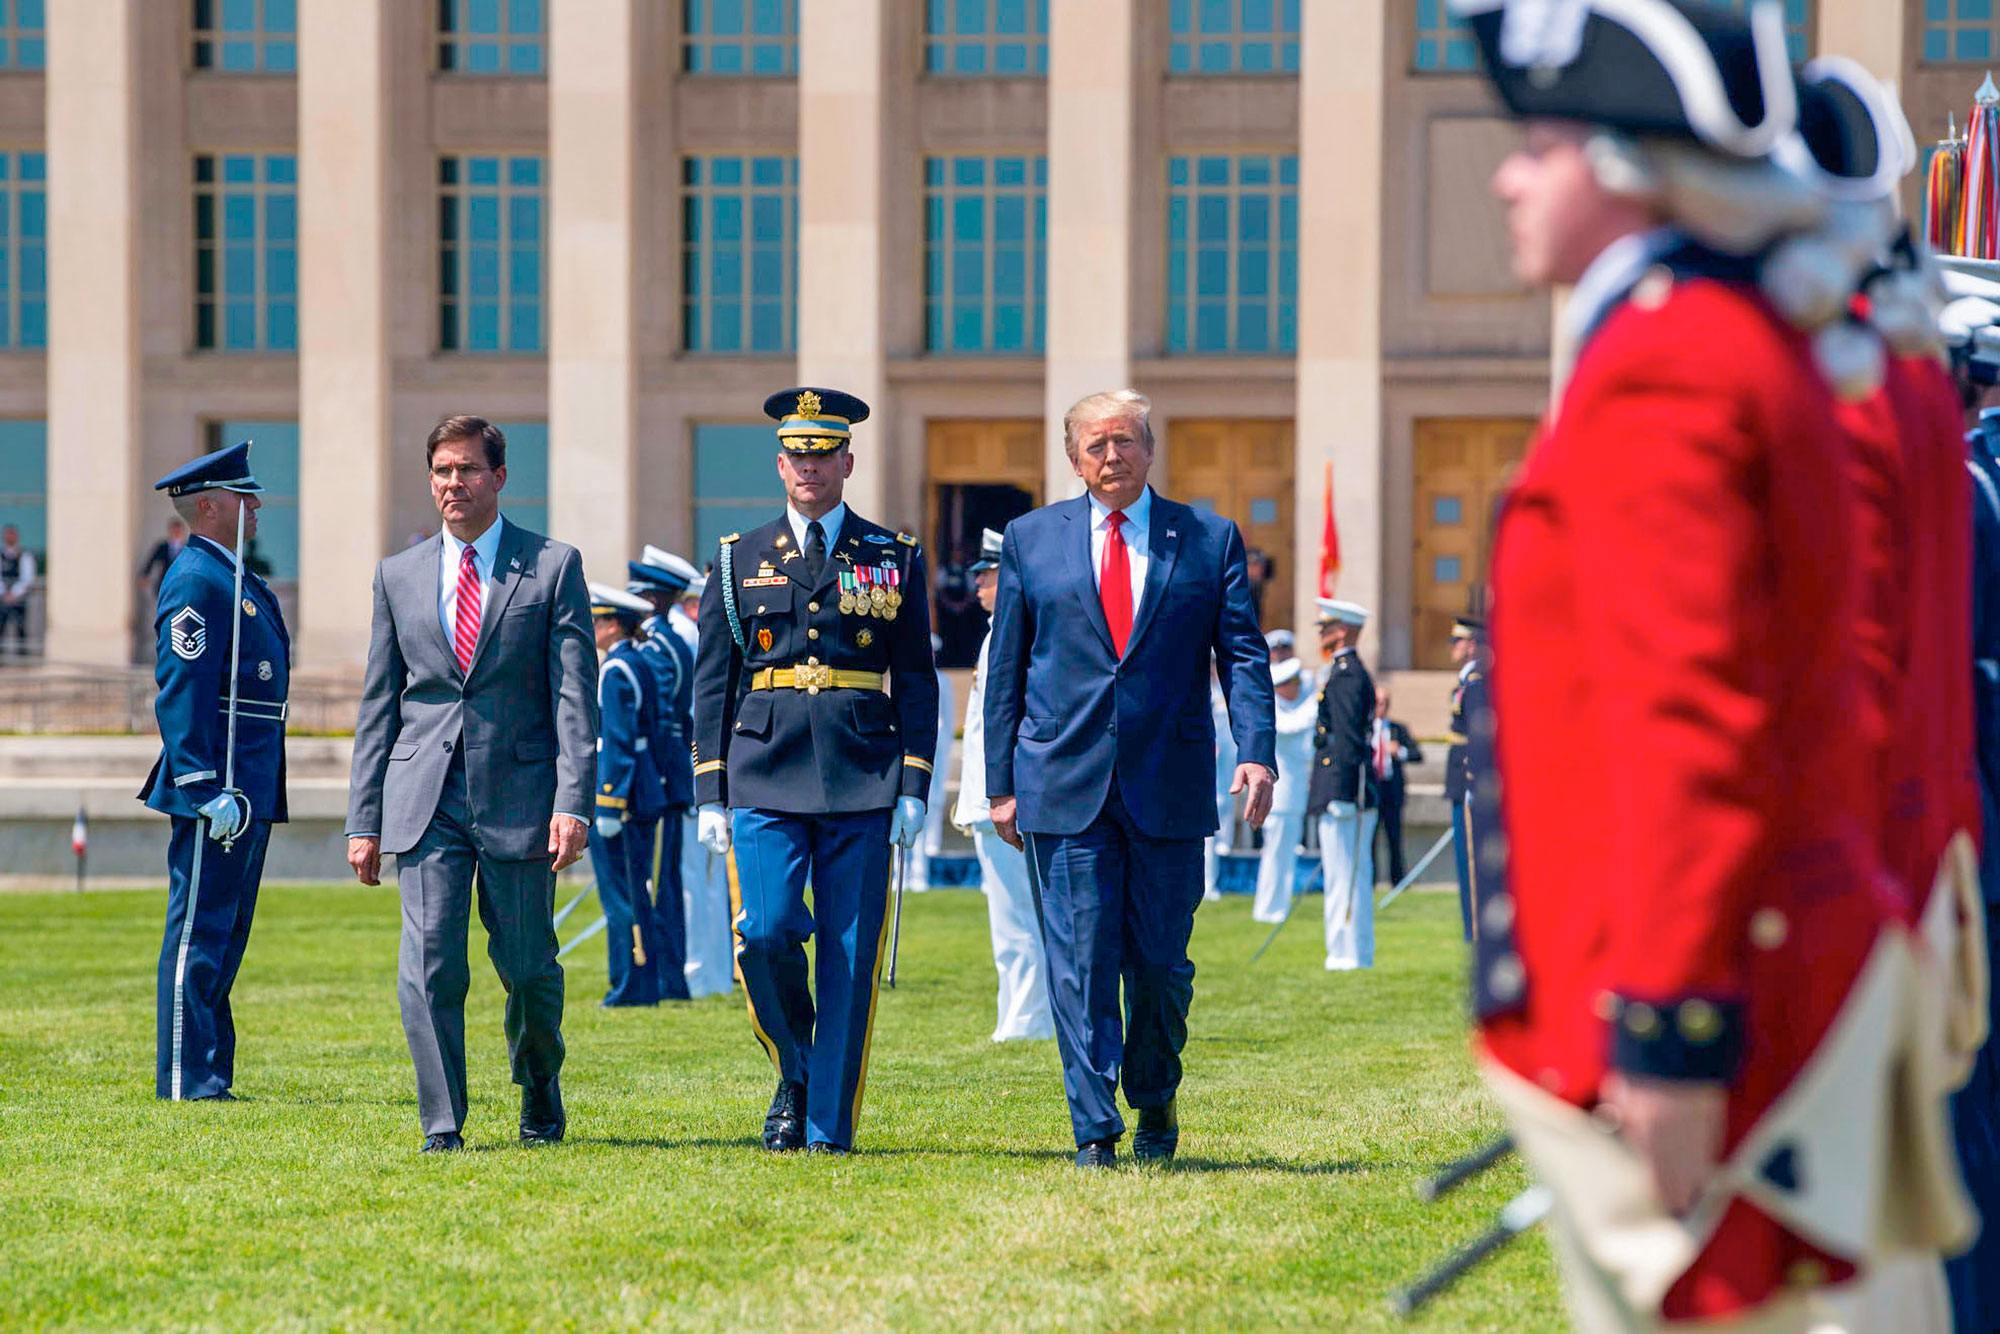 President Donald J. Trump walks with Defense Secretary Dr. Mark T. Esper during a welcome ceremony in Esper's honor at the Pentagon, July 25, 2019.